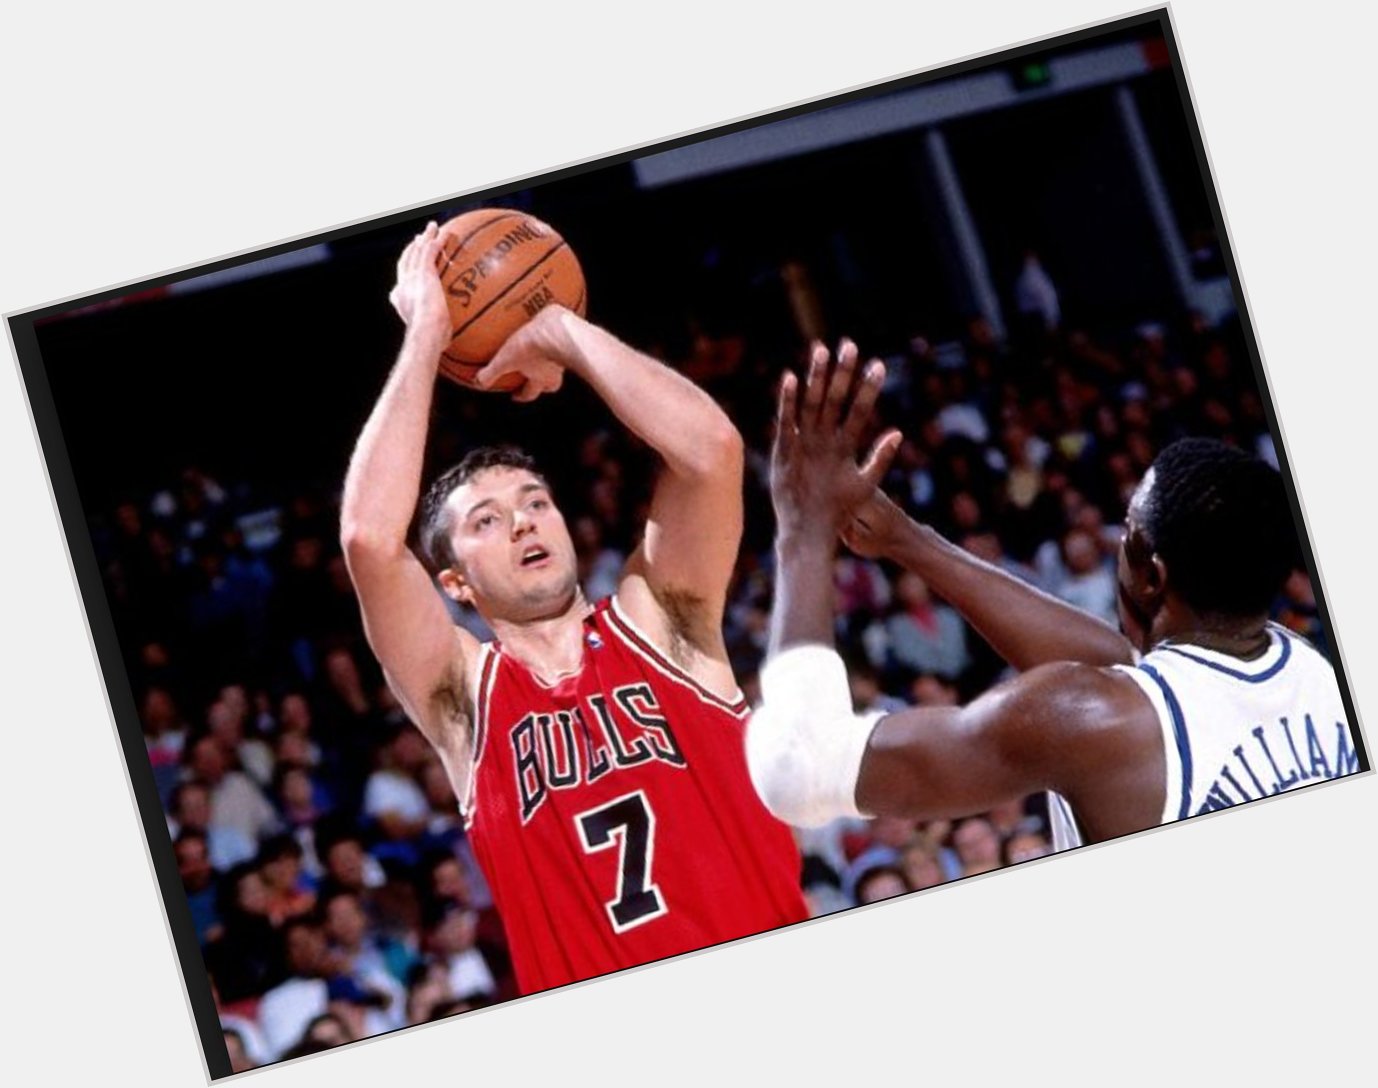 49 years old today. Big-shot maker in his days with MJ & those Bulls. Happy birthday to Toni Kukoc! 